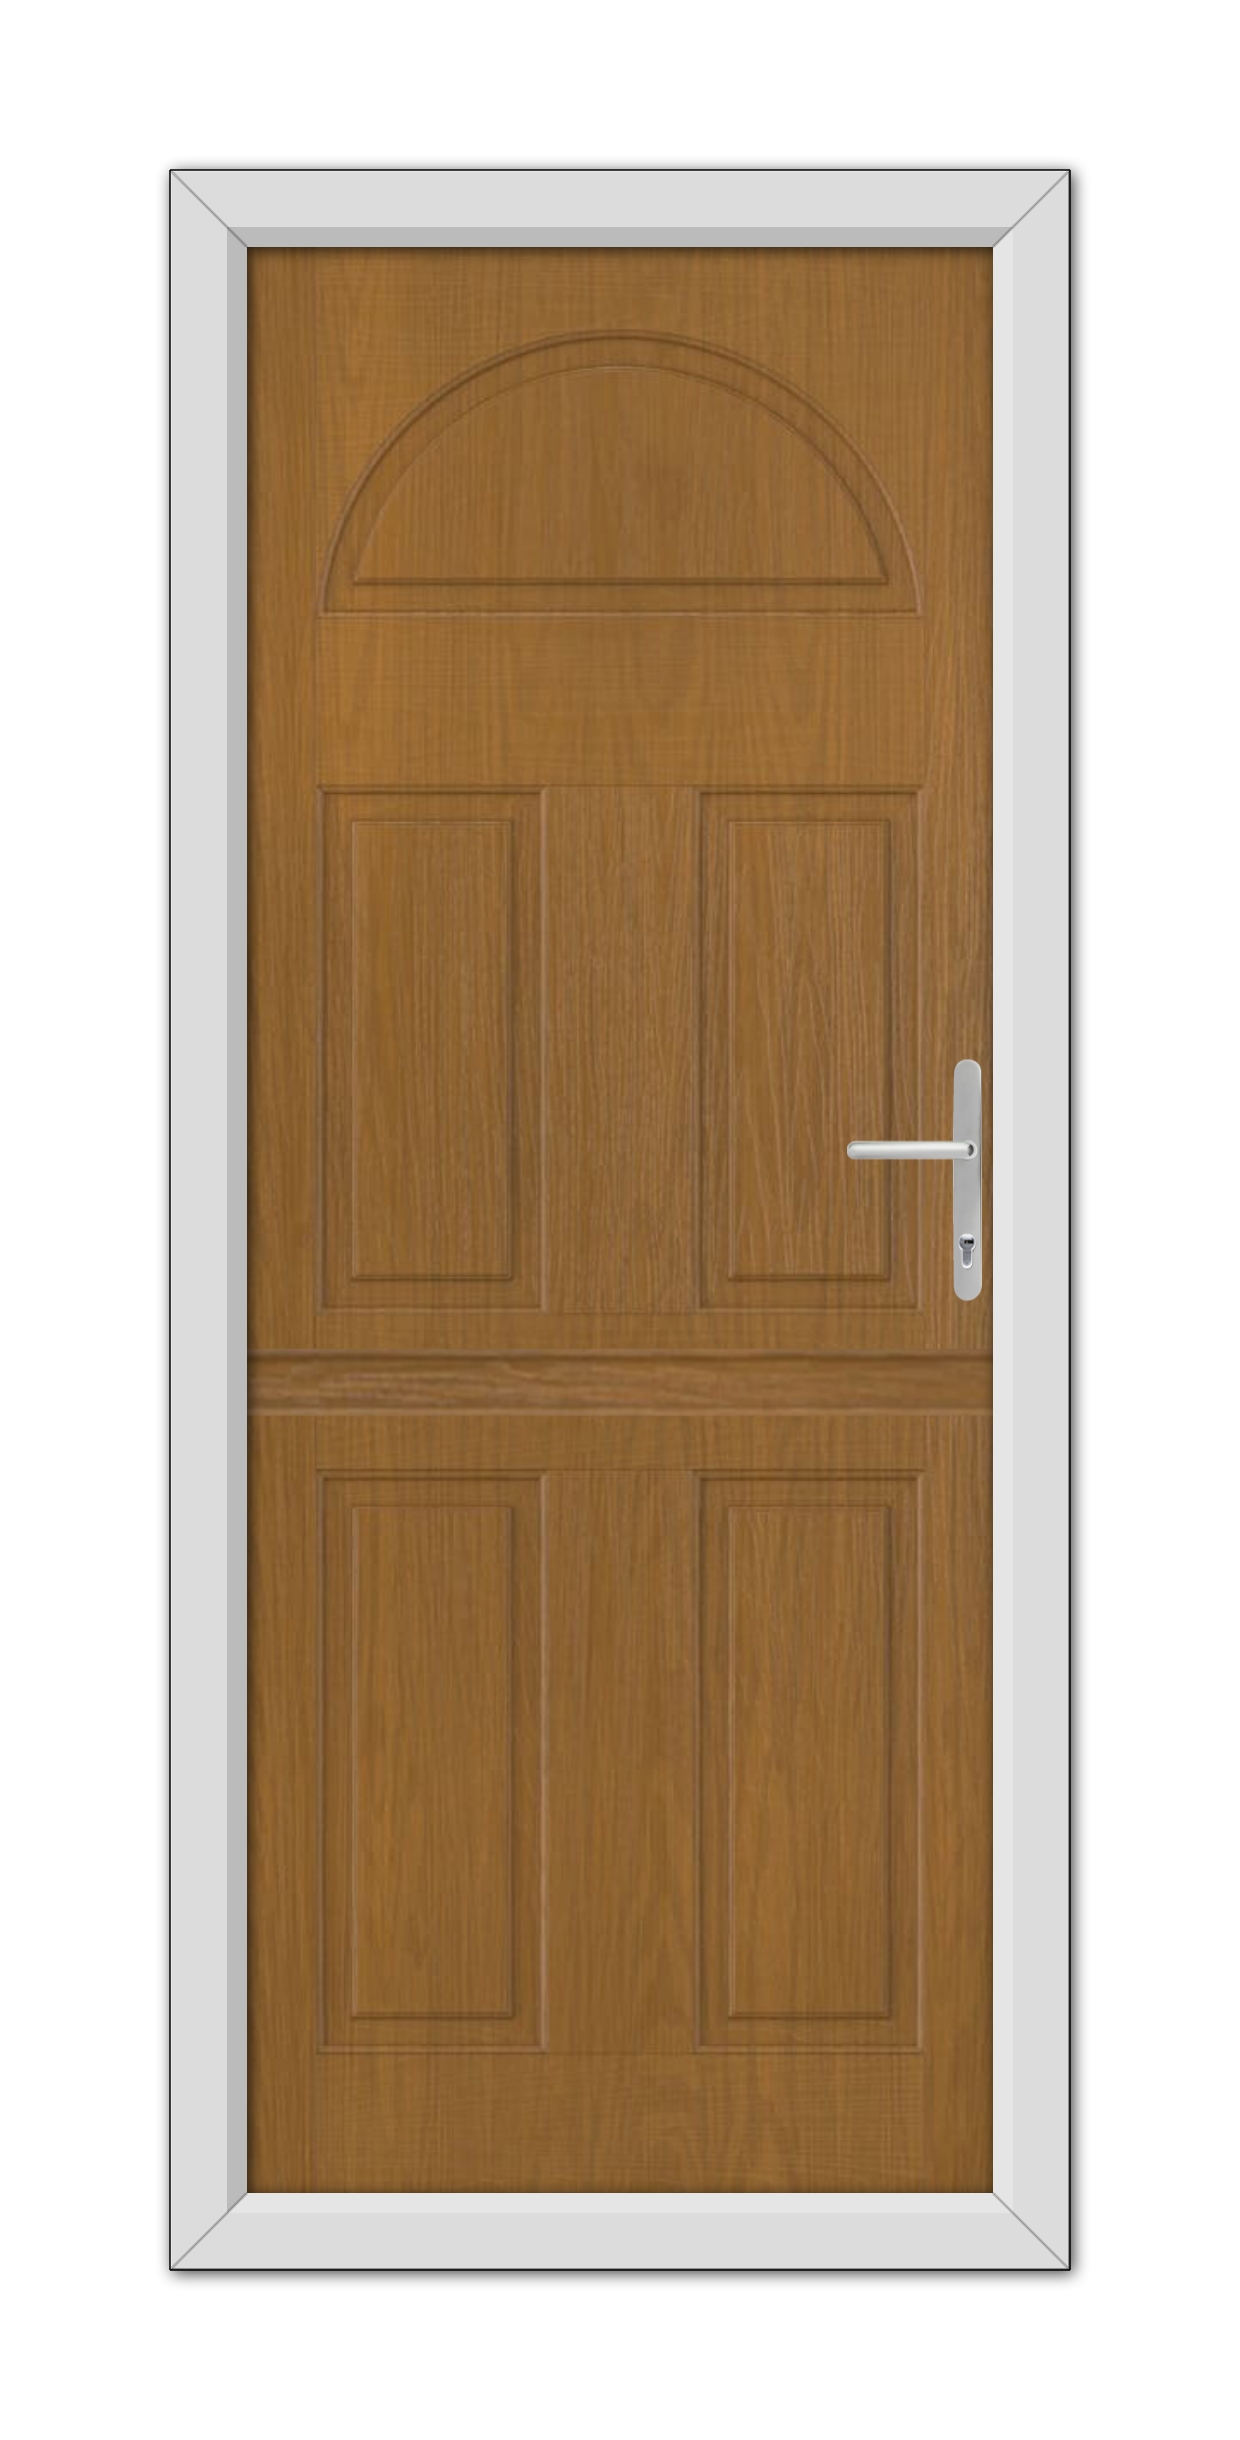 A closed Oak Winslow Solid Stable Composite Door 48mm Timber Core with a white handle set on a white door frame, featuring an arched design at the top.